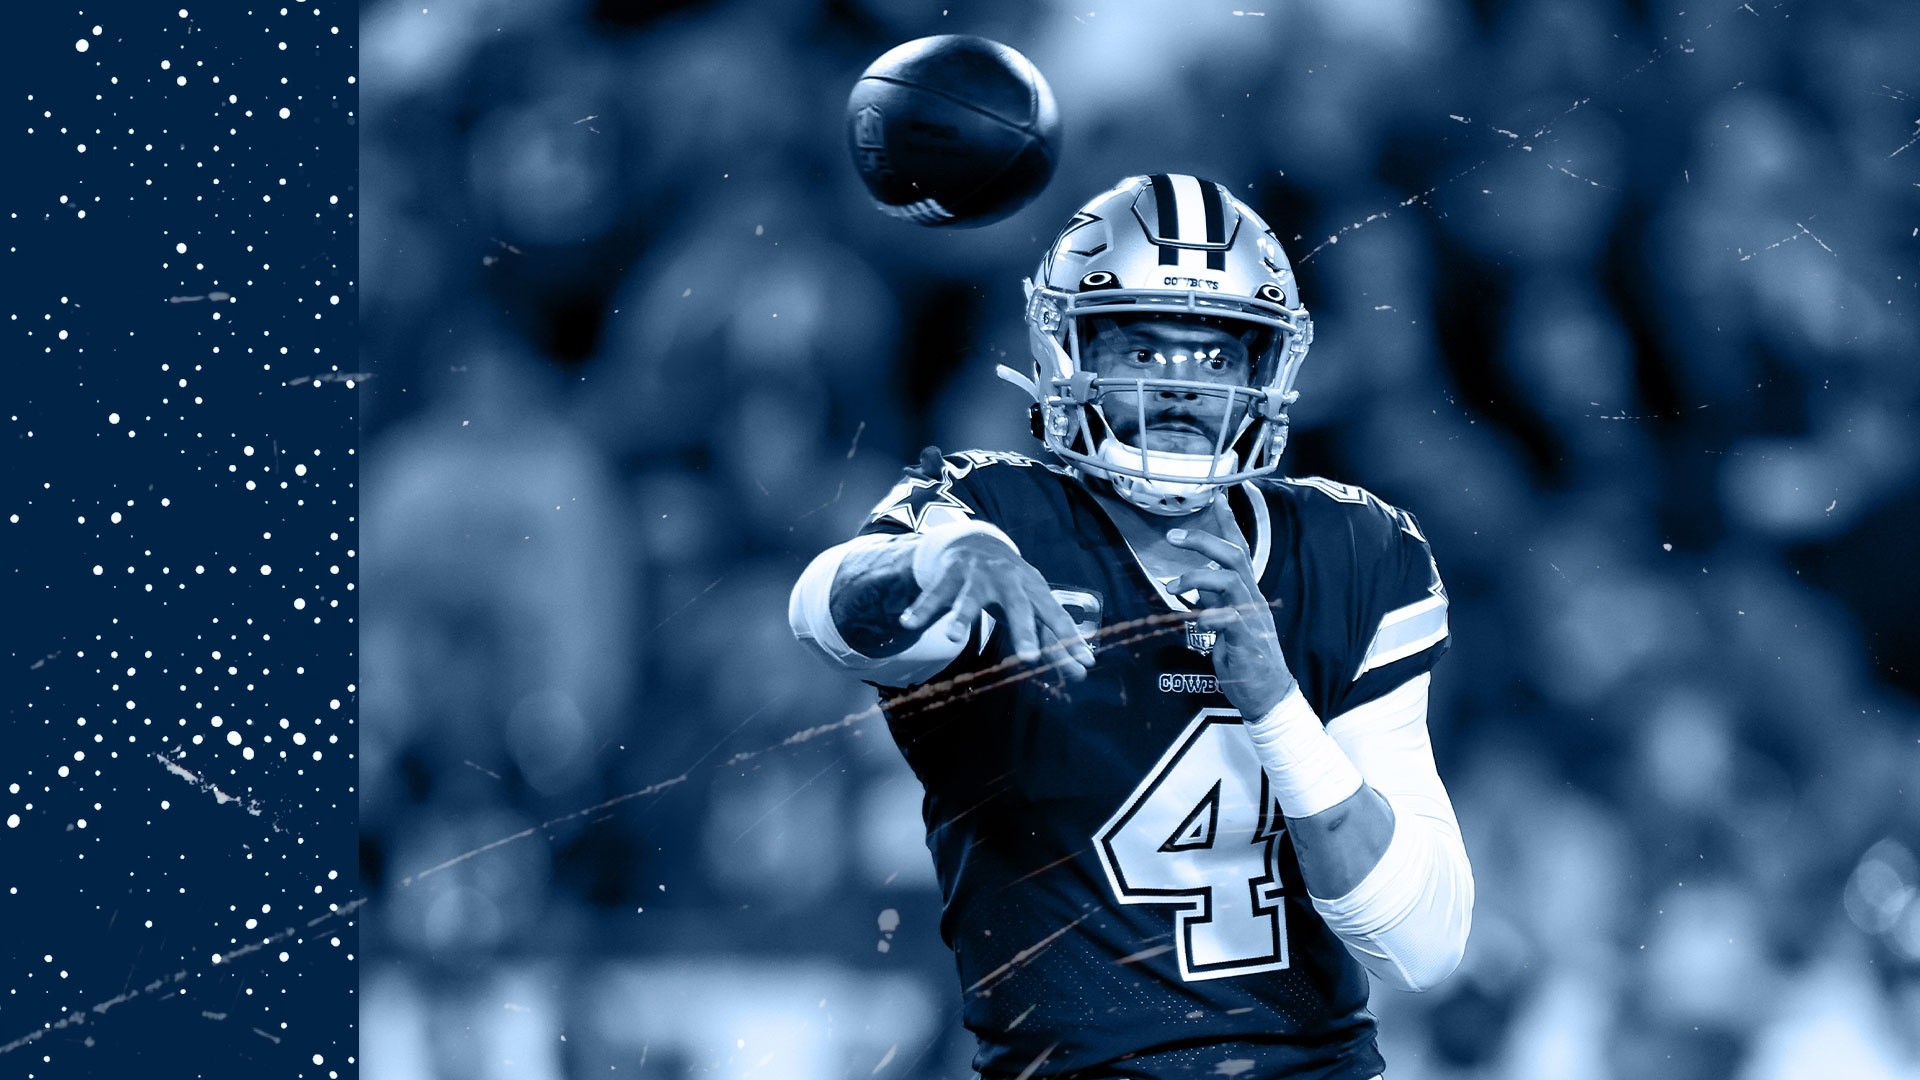 Dallas Cowboys Advance to Divisional Round to Play 49ers